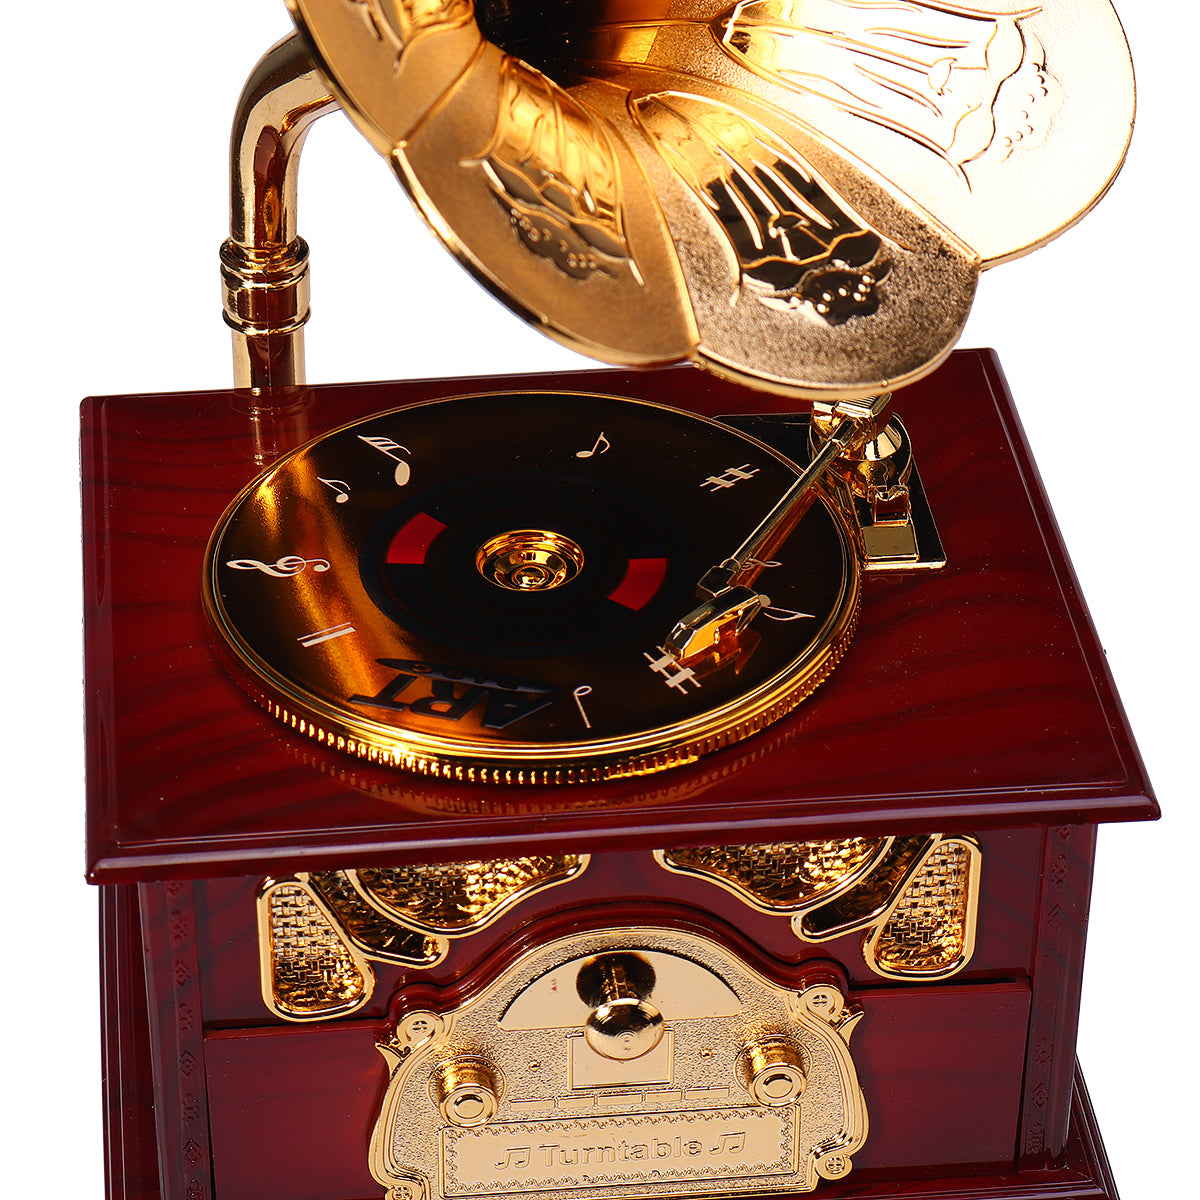 Phonograph Record Player Music Box Jewellery storage Old Timer Vintage Retro Style Home Decor Musical Gift Toy